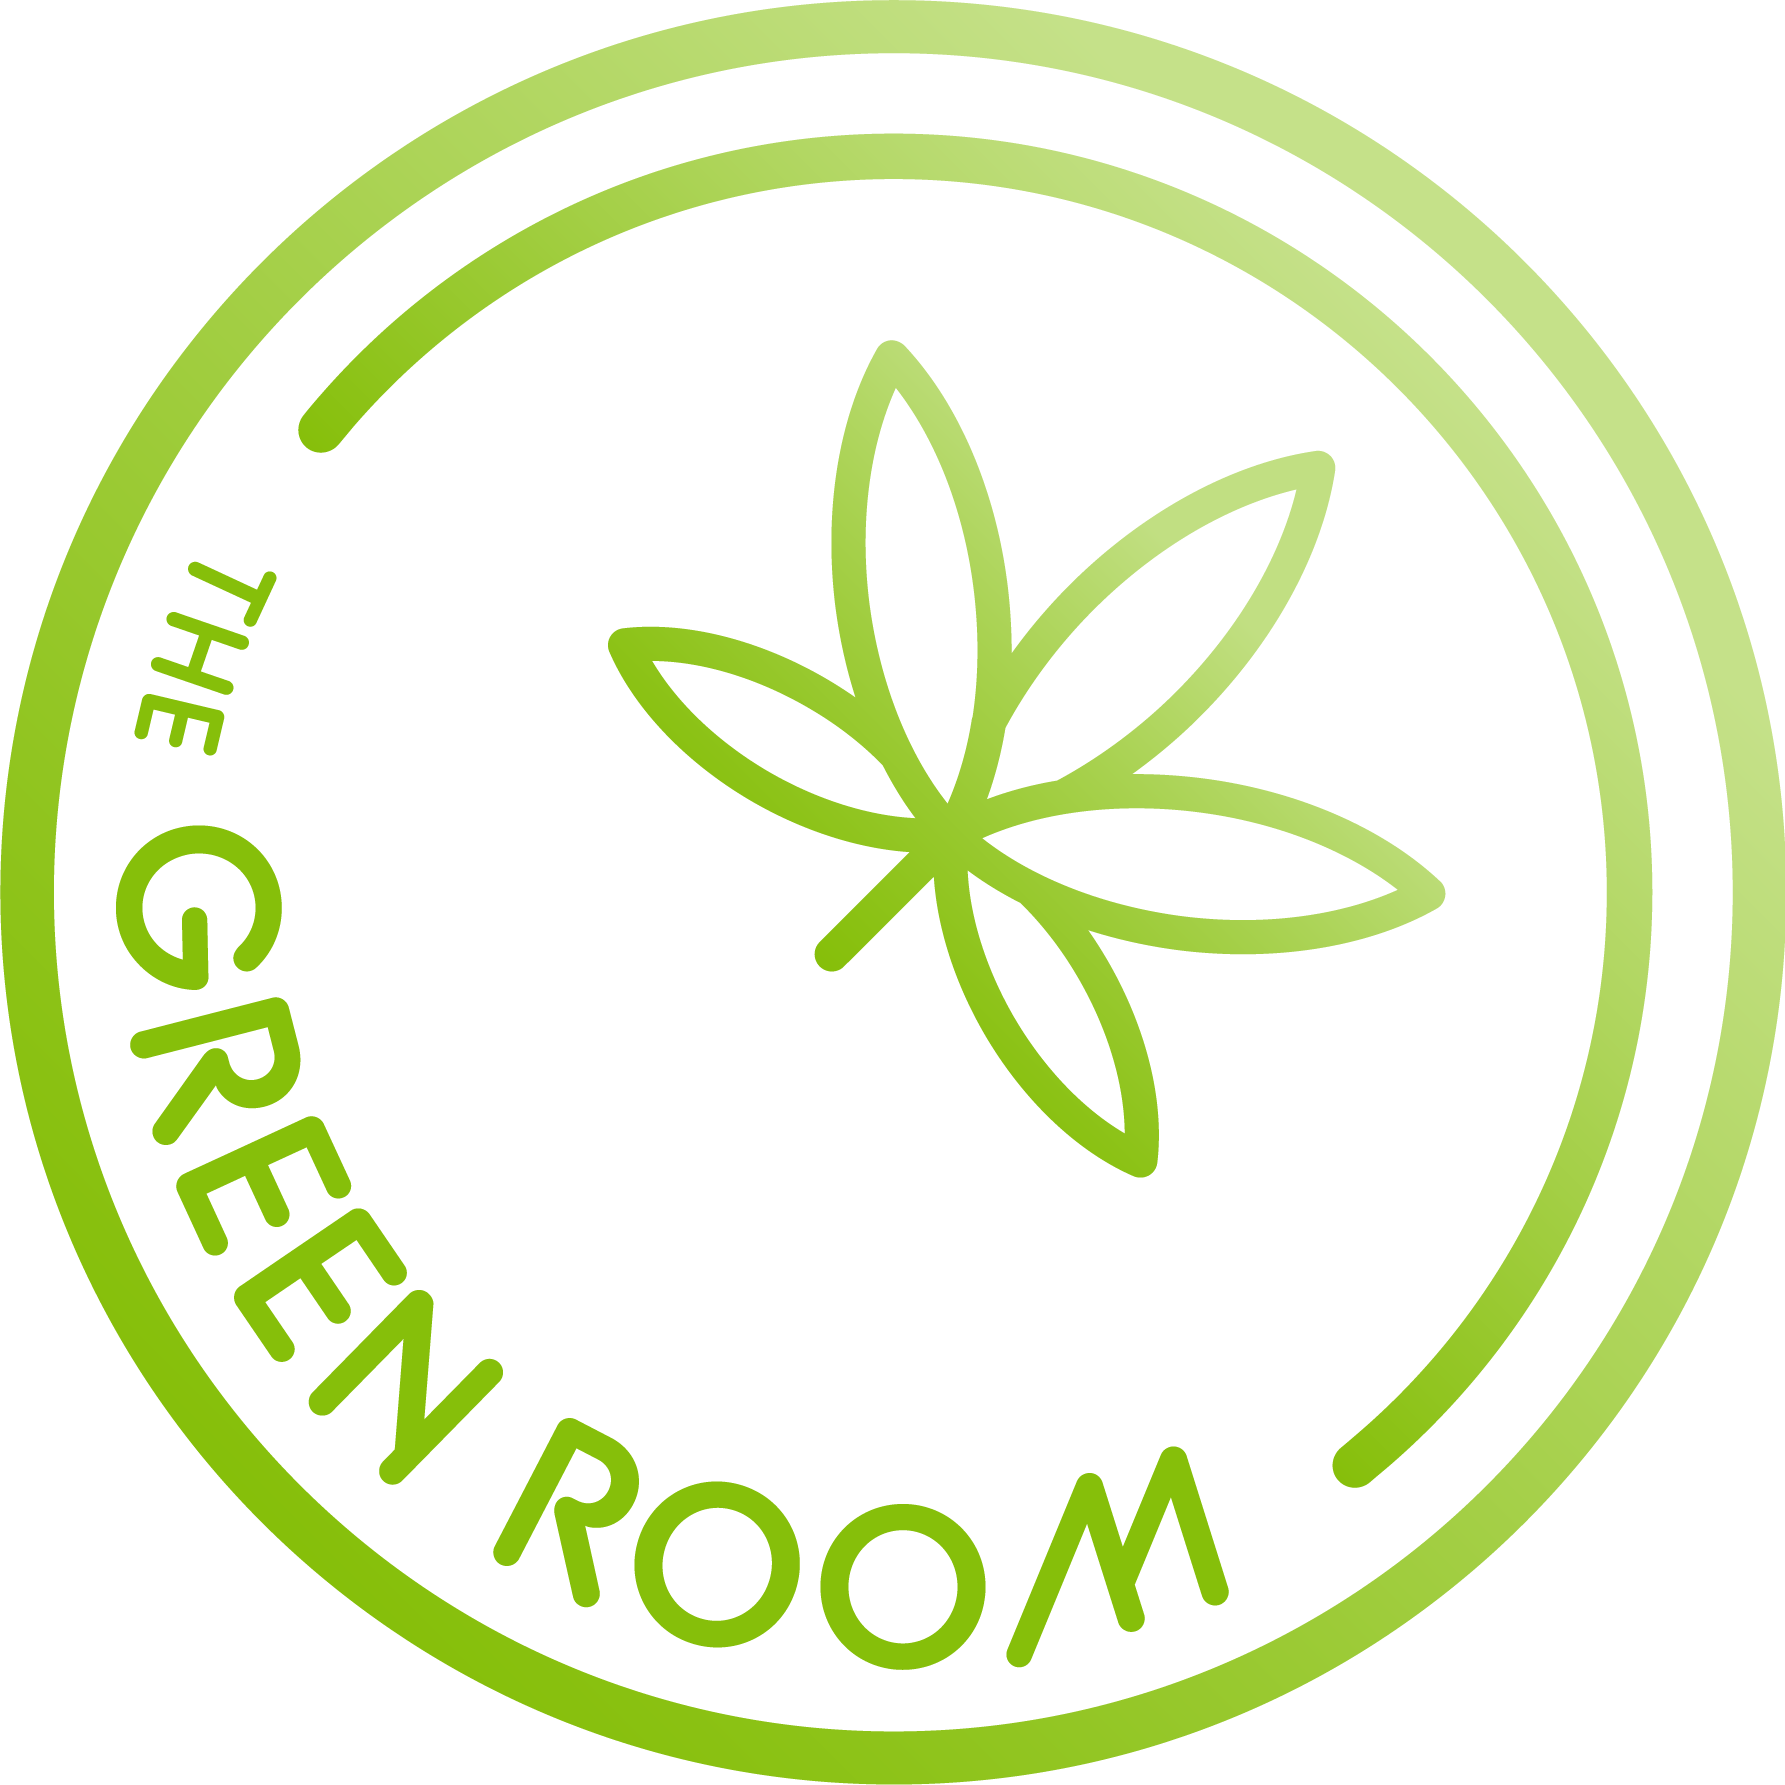 Company logo of The Green Room - West Village